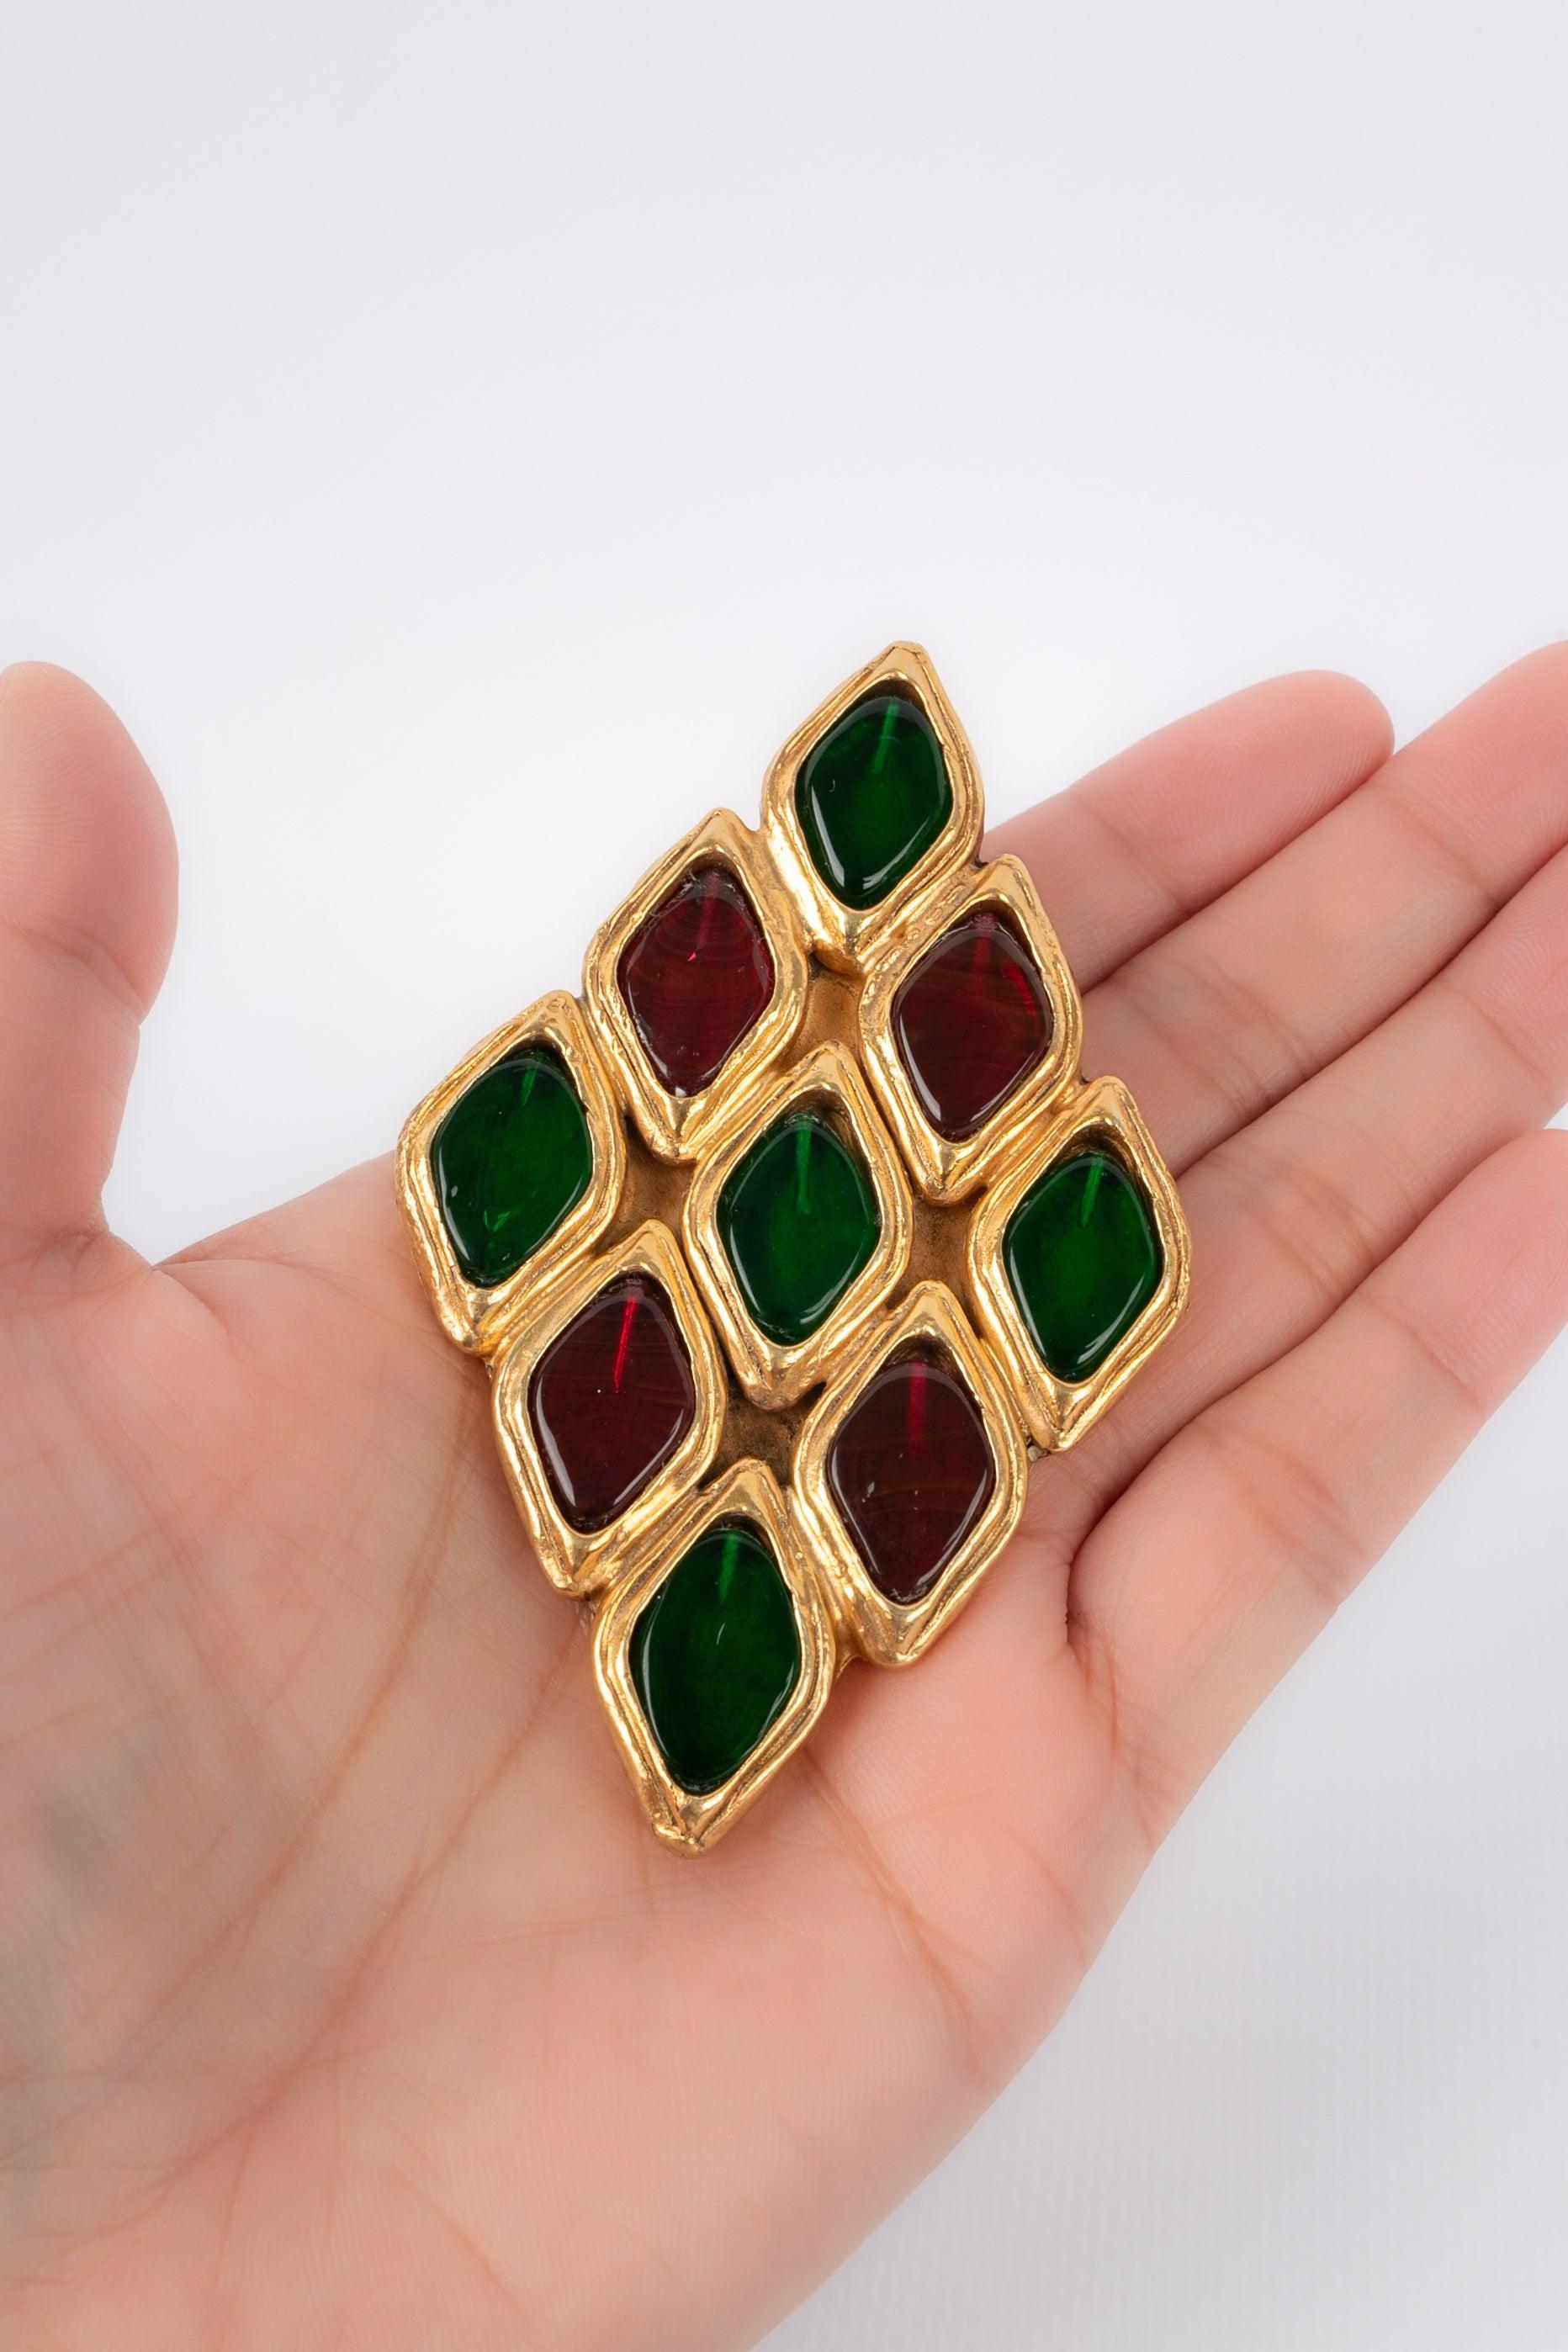 Chanel - (Made in France) Golden metal brooch with a diamond shape ornamented with red and green glass paste cabochons.

Additional information:
Condition: Very good condition
Dimensions: 8 cm x 5 cm

Seller Reference: BRB6